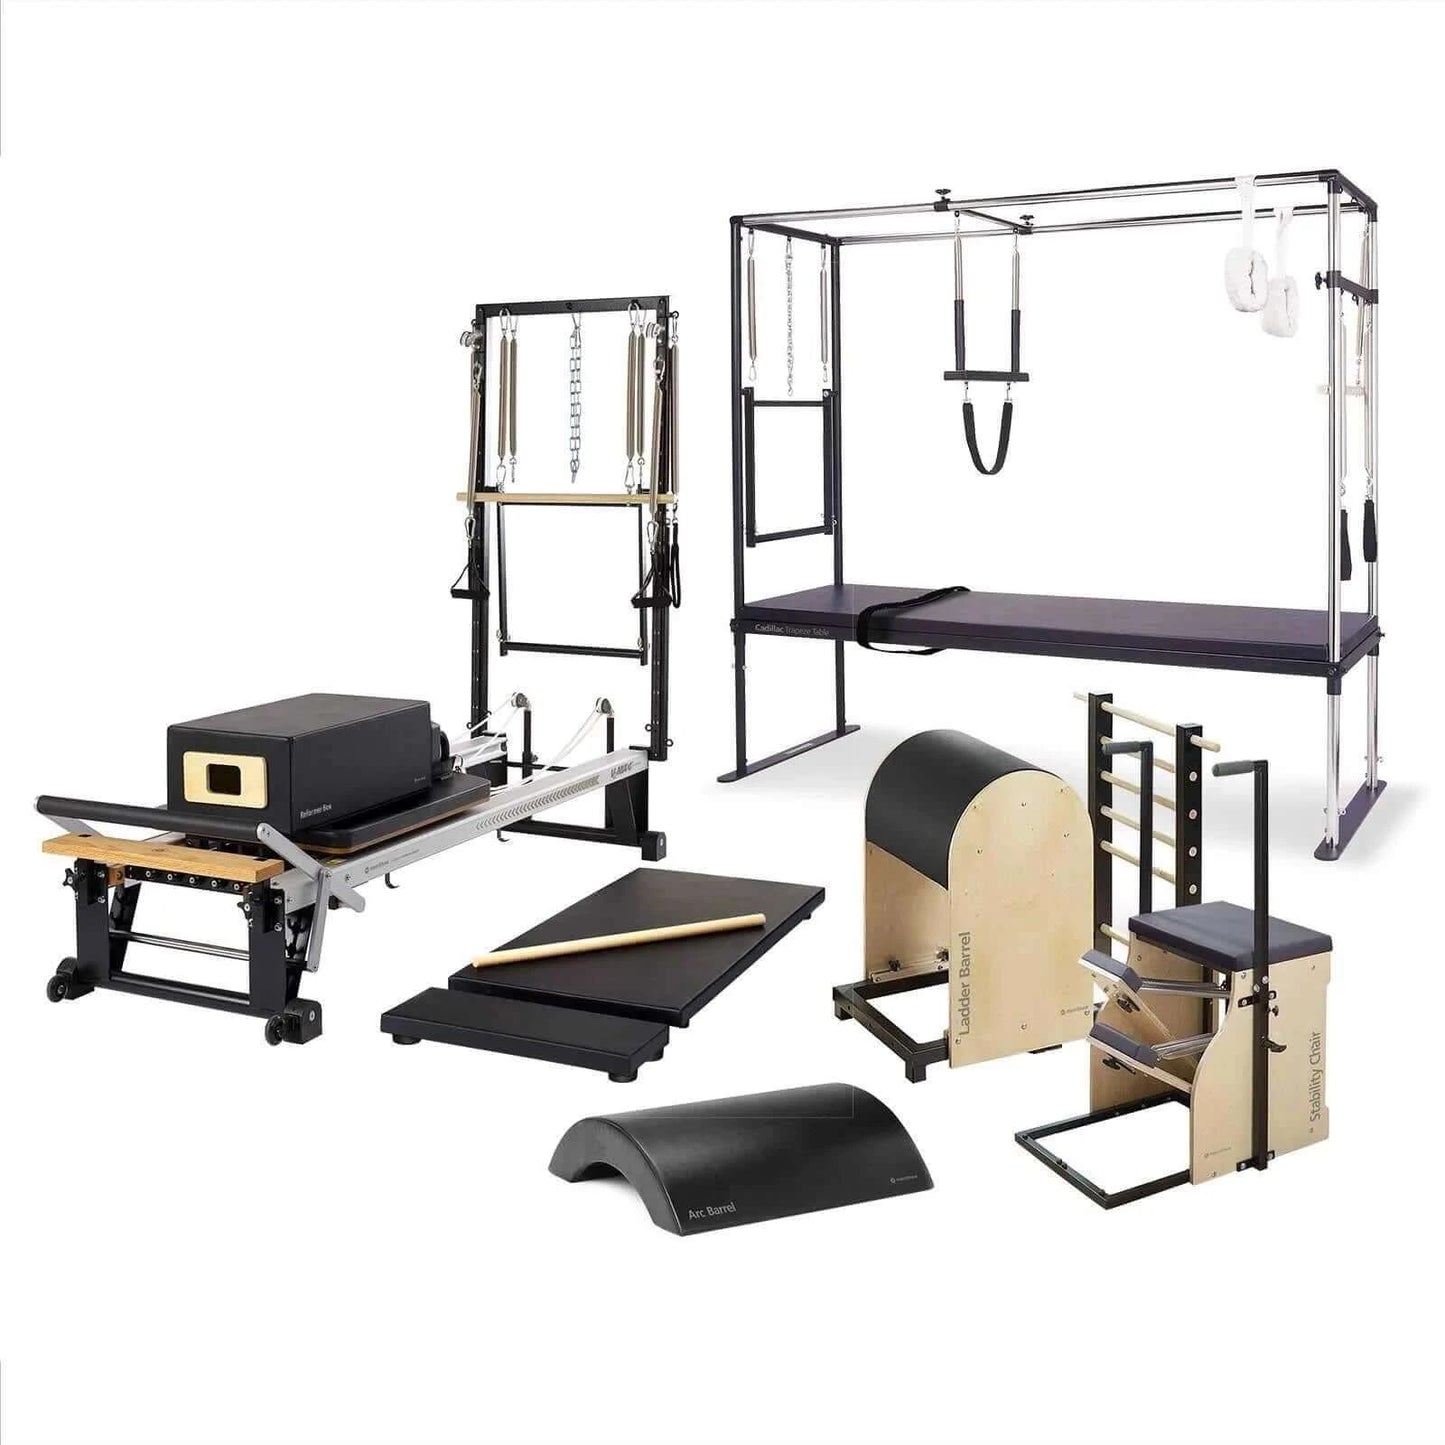 Black Merrithew™ Pilates Enhanced One-On-One Studio Bundle by Merrithew™ sold by Pilates Matters® by BSP LLC